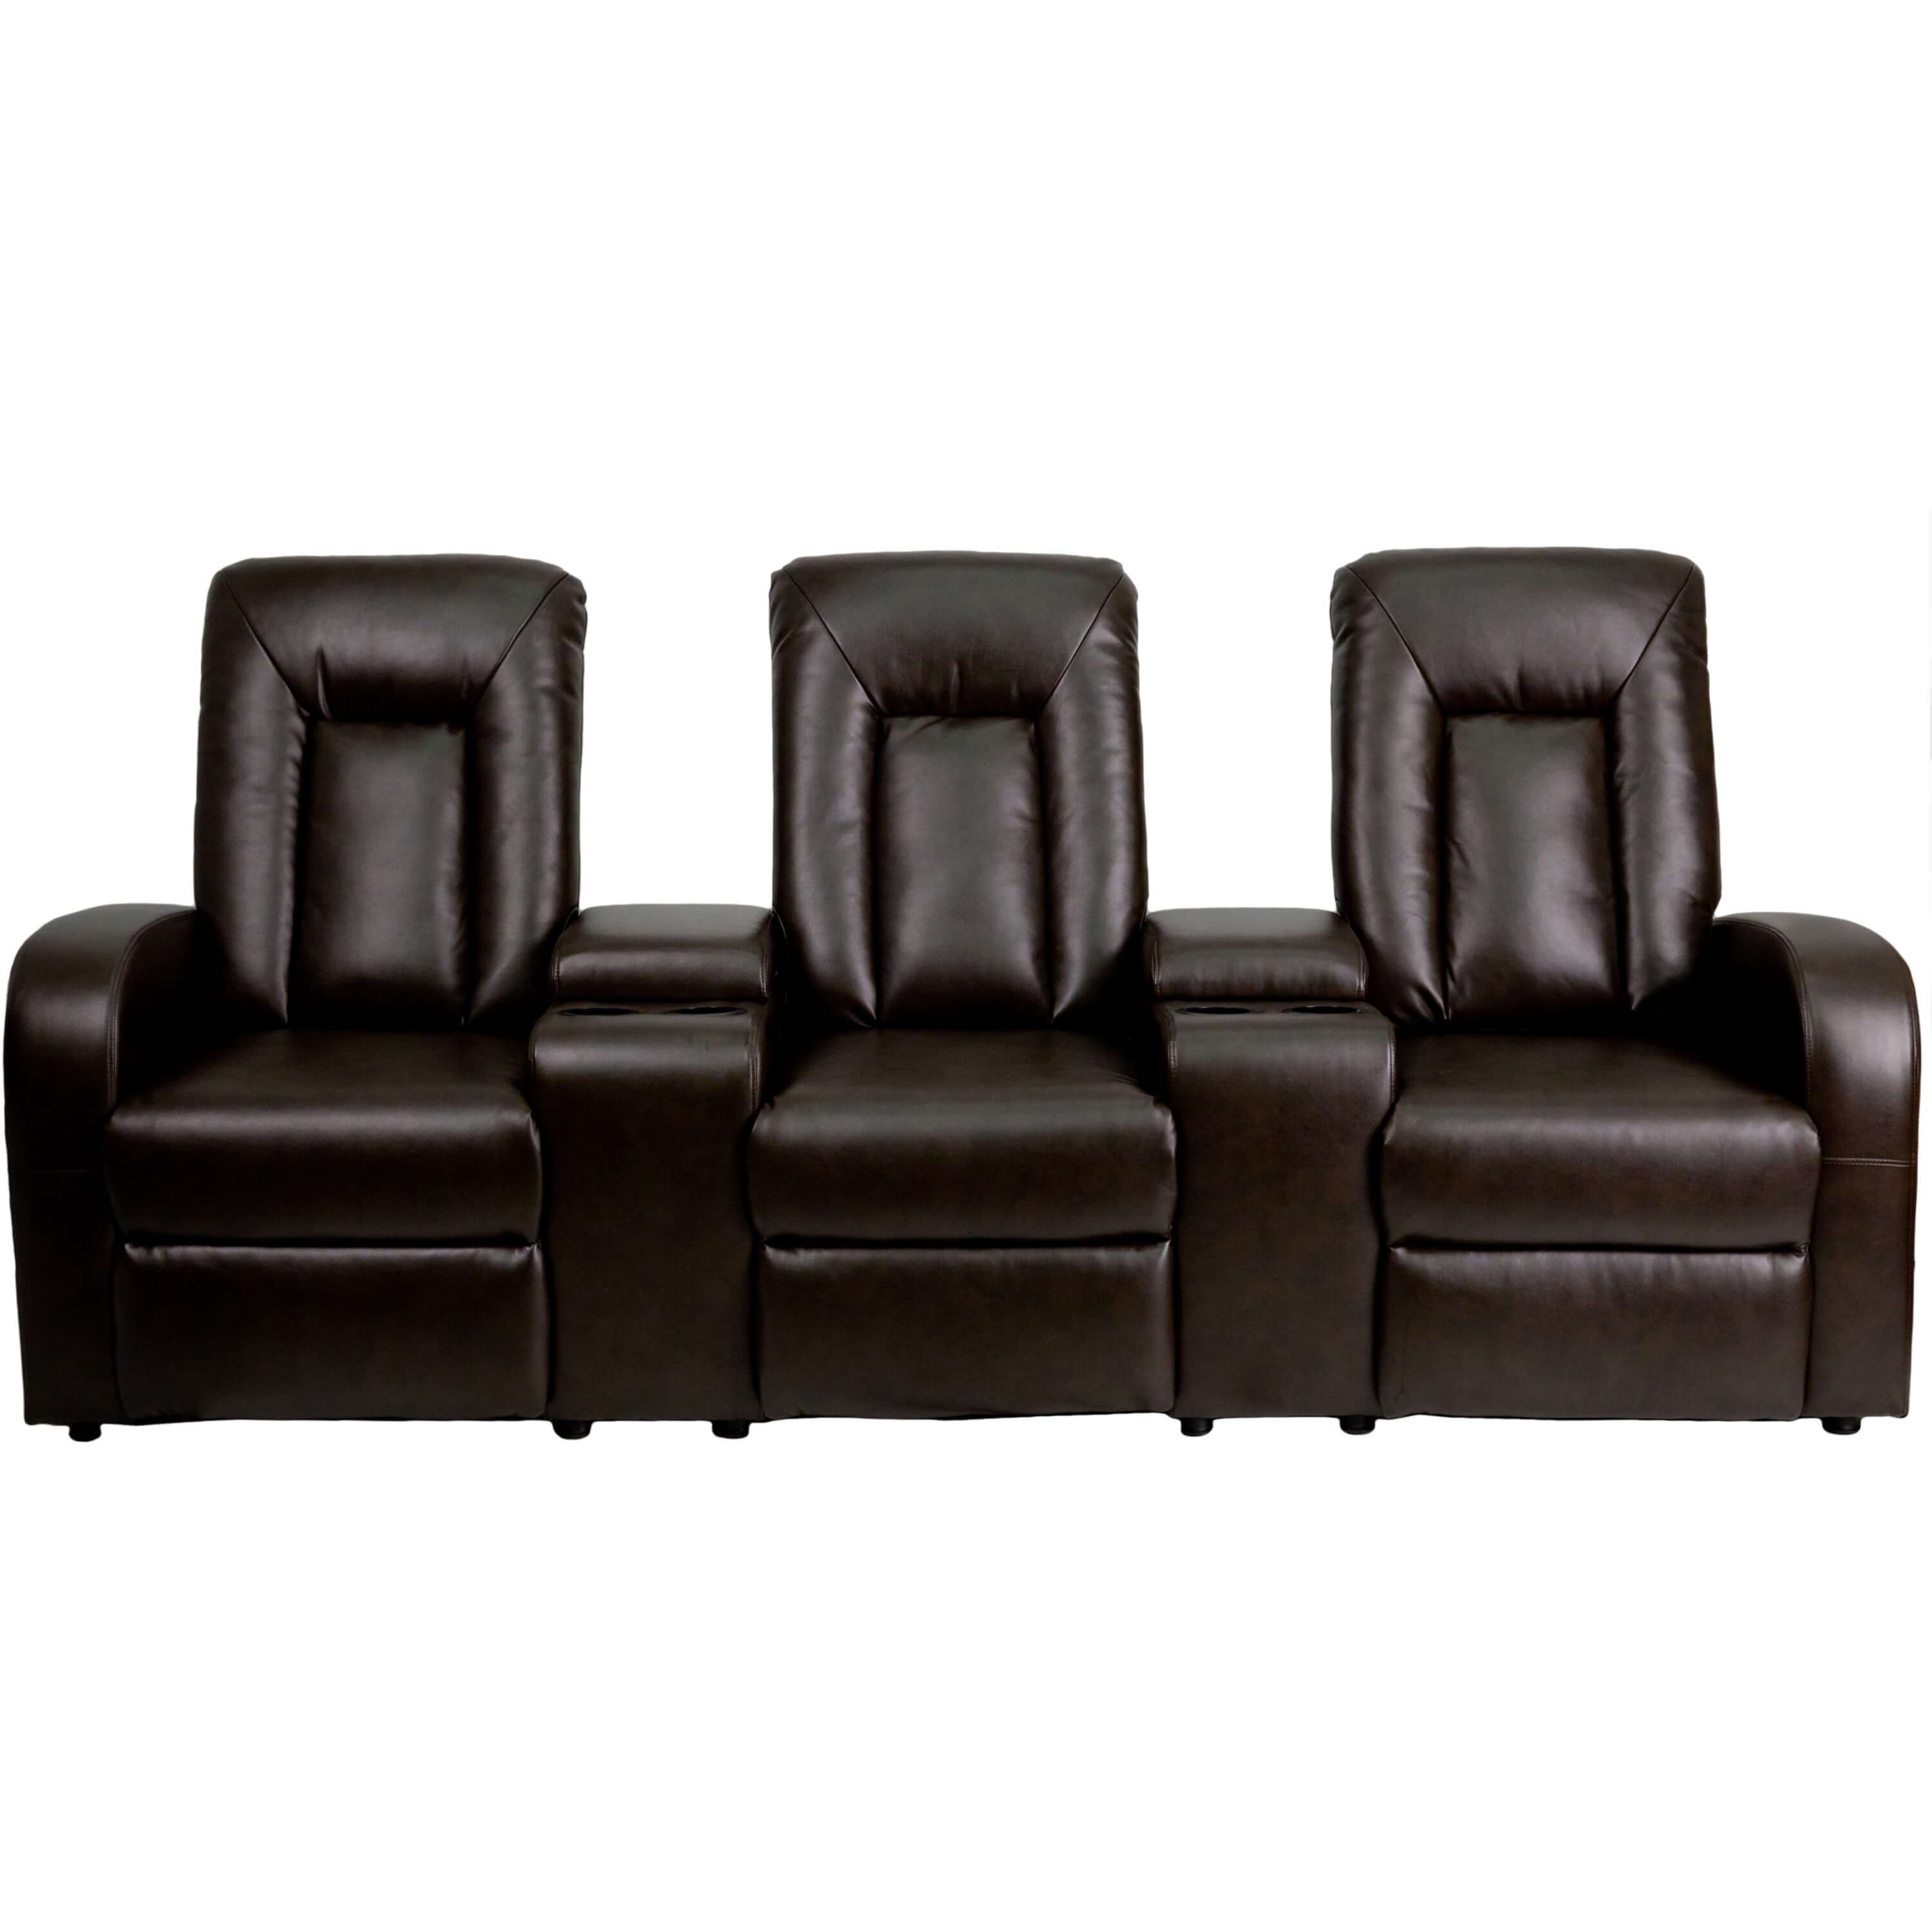 Poitier Leather Home Theater Seating, Leather Theatre Seating For Home